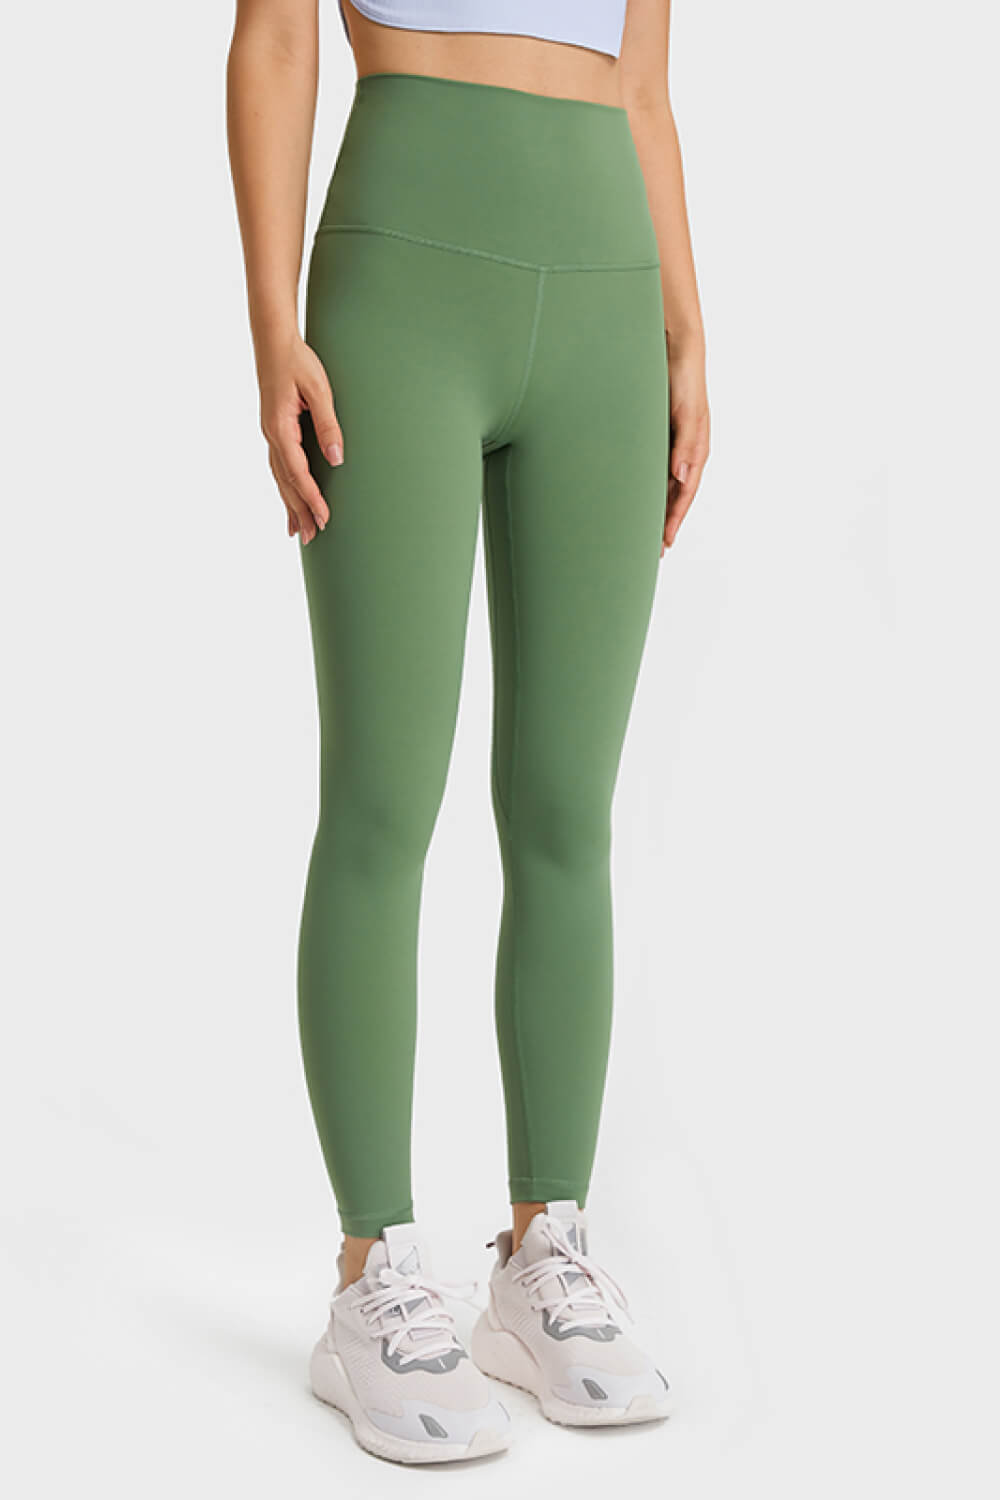 Lululemon High Rise Tights Size 8 Color Green